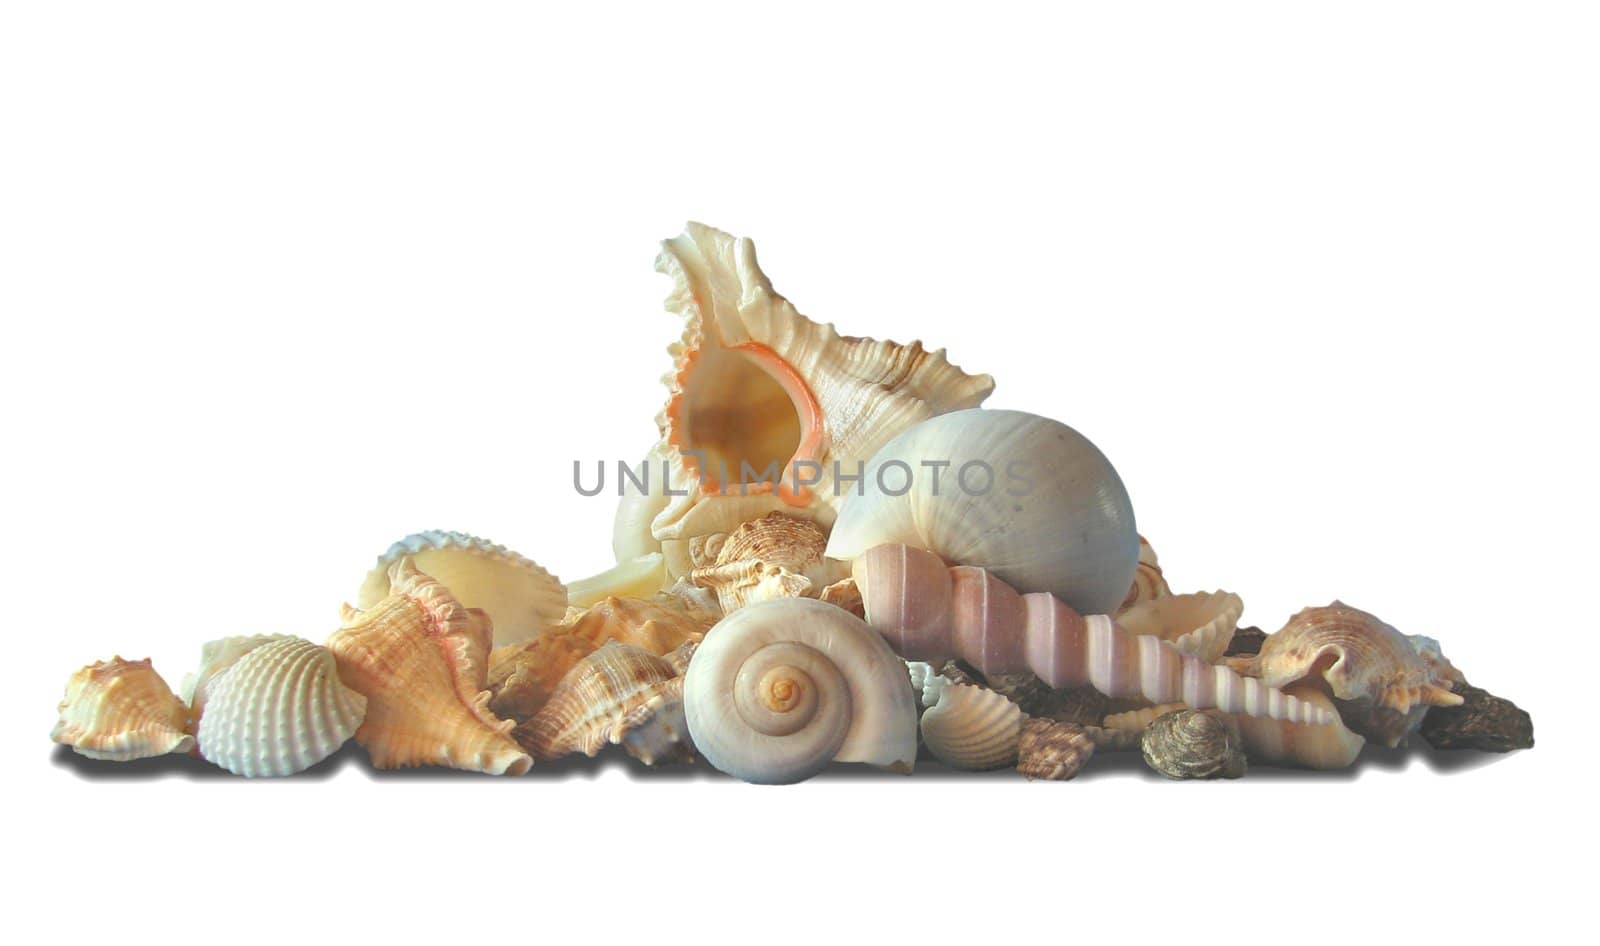 Composition of sea cockleshells, mollusks. clipping path
On a white background
